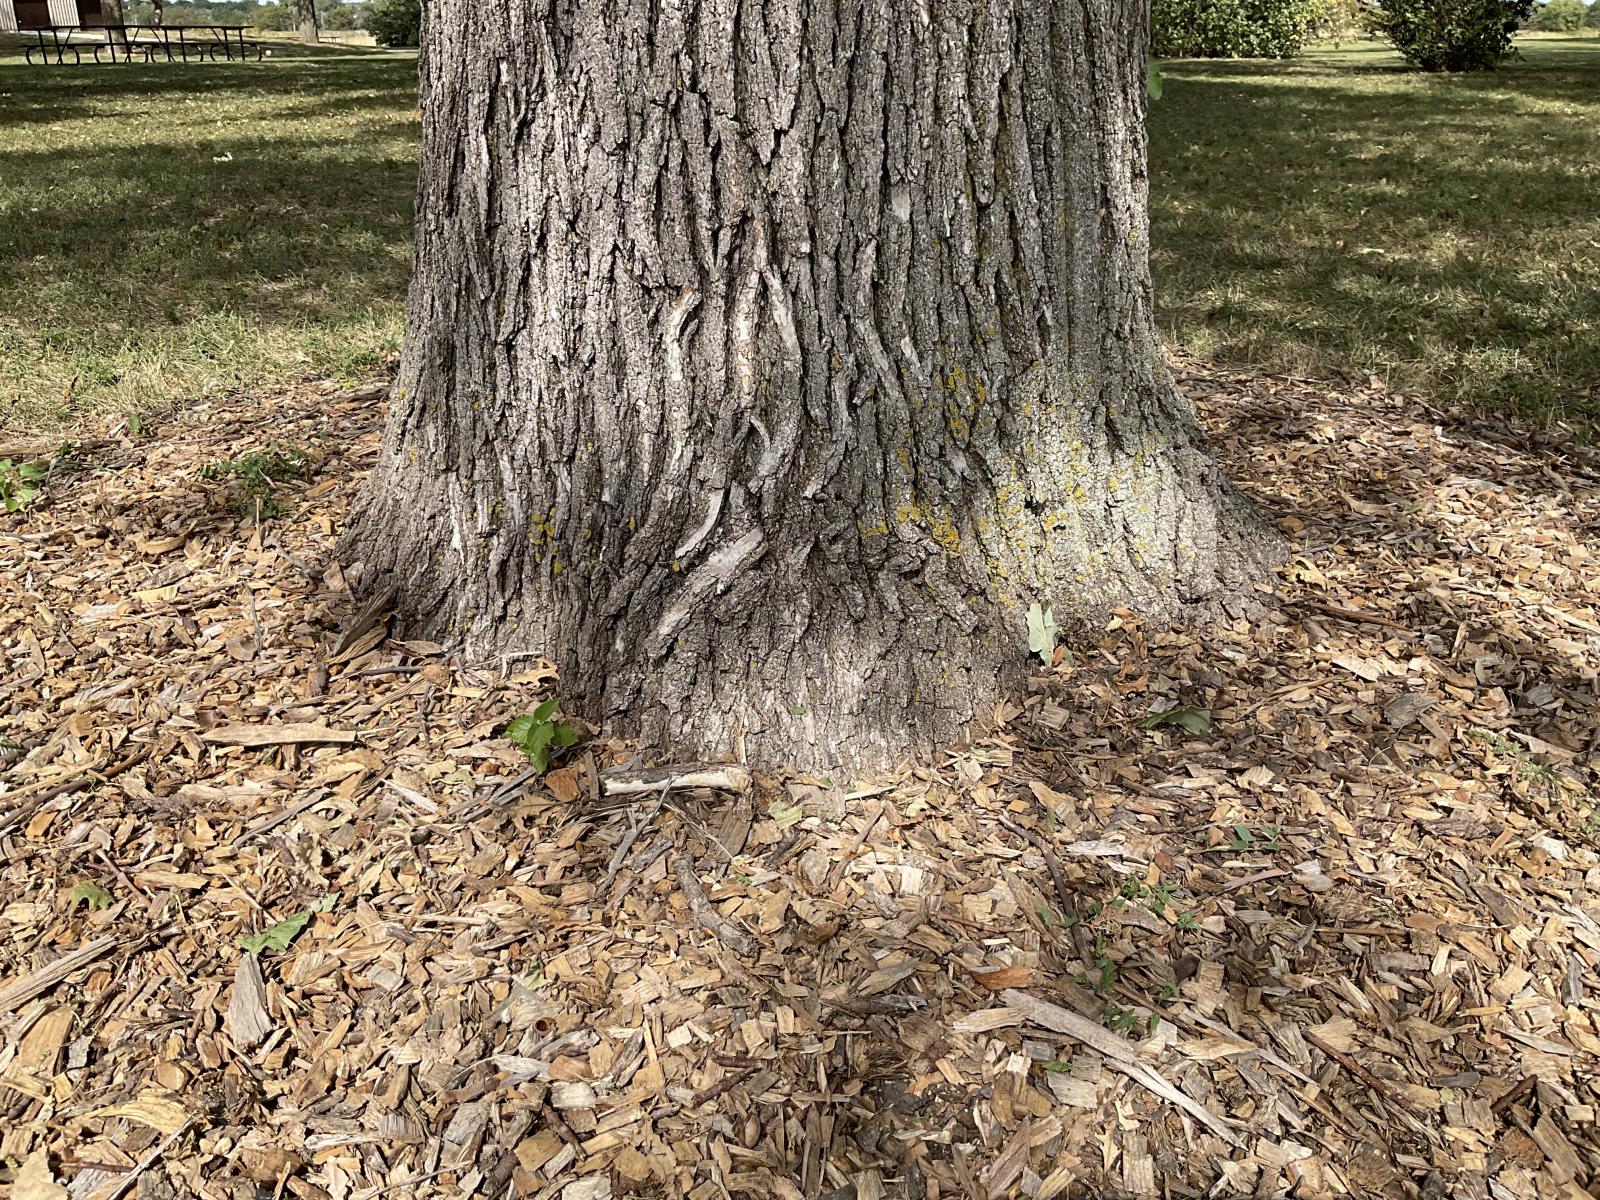 Tree's planted at the correct depth can easily be identified by a noticeable root flare at the soil surface.